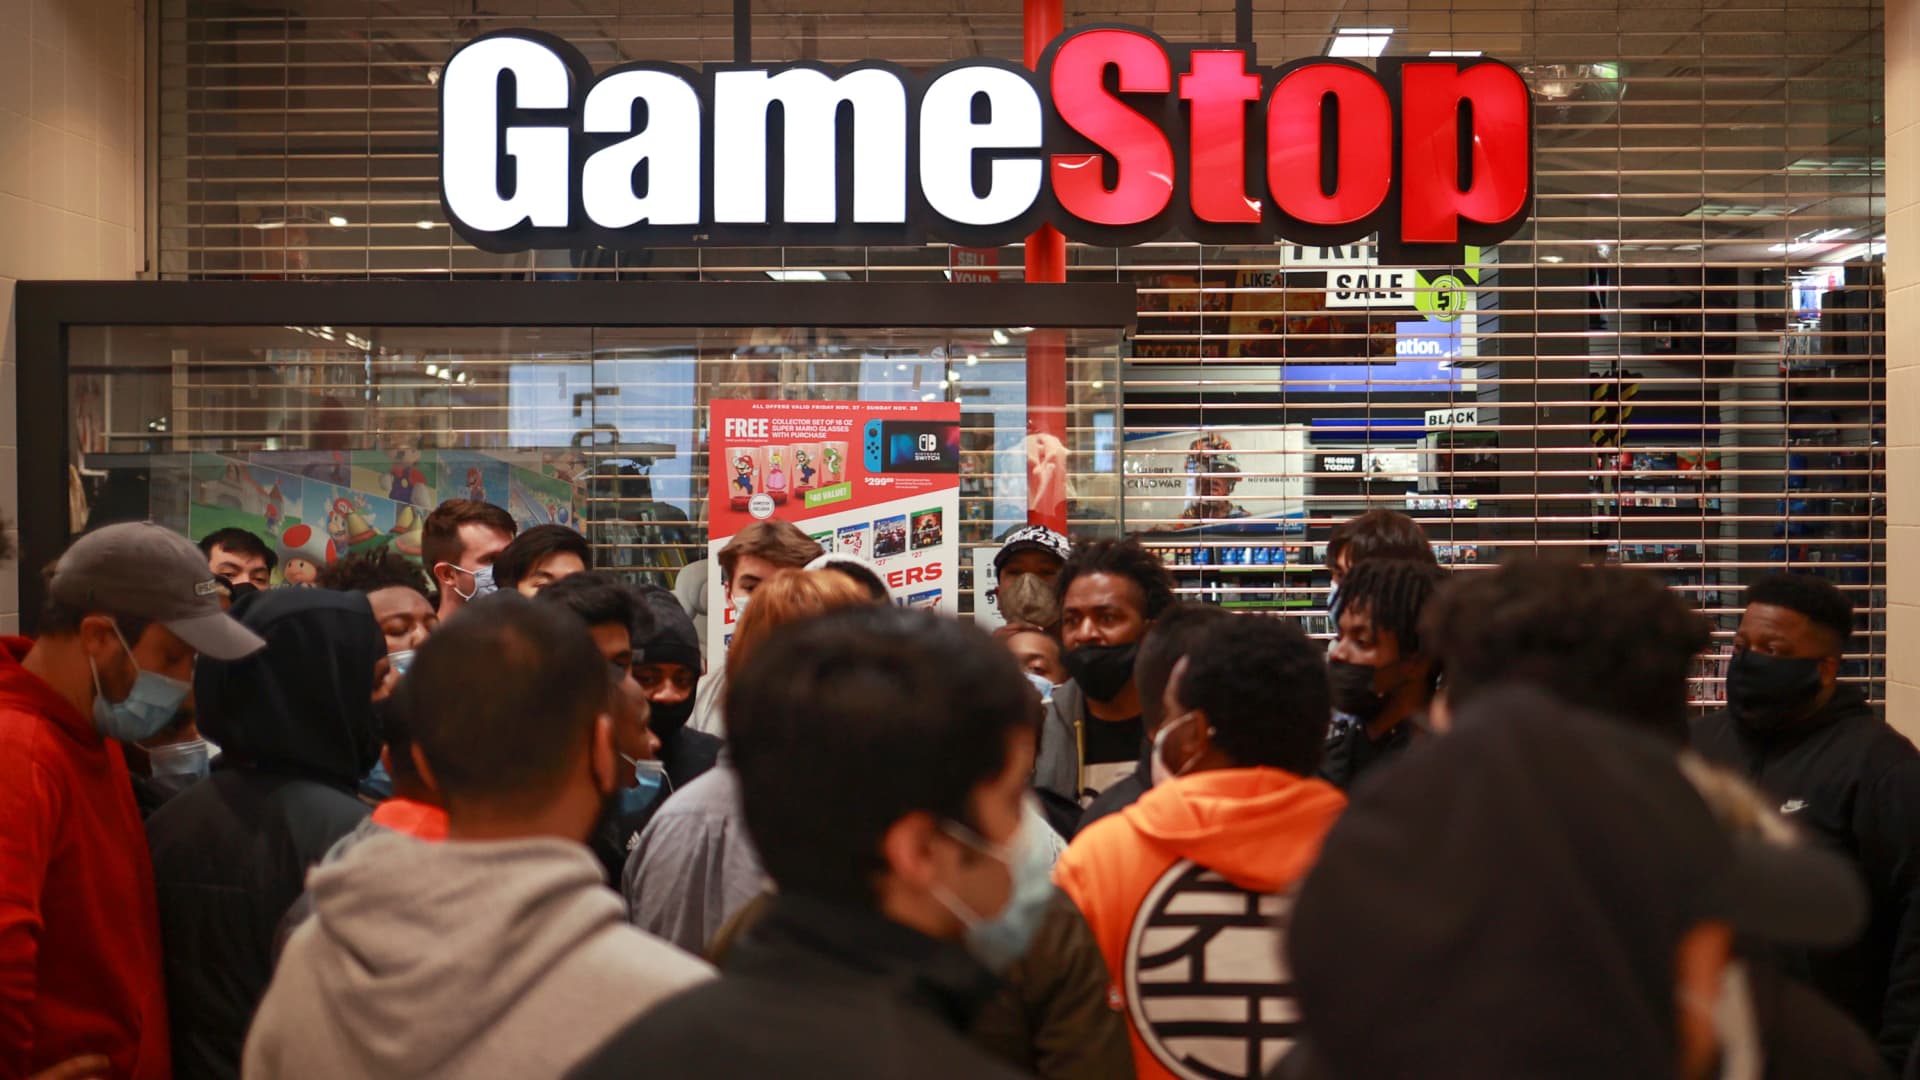 Stocks making the biggest moves midday: GameStop, Tesla, FedEx and more